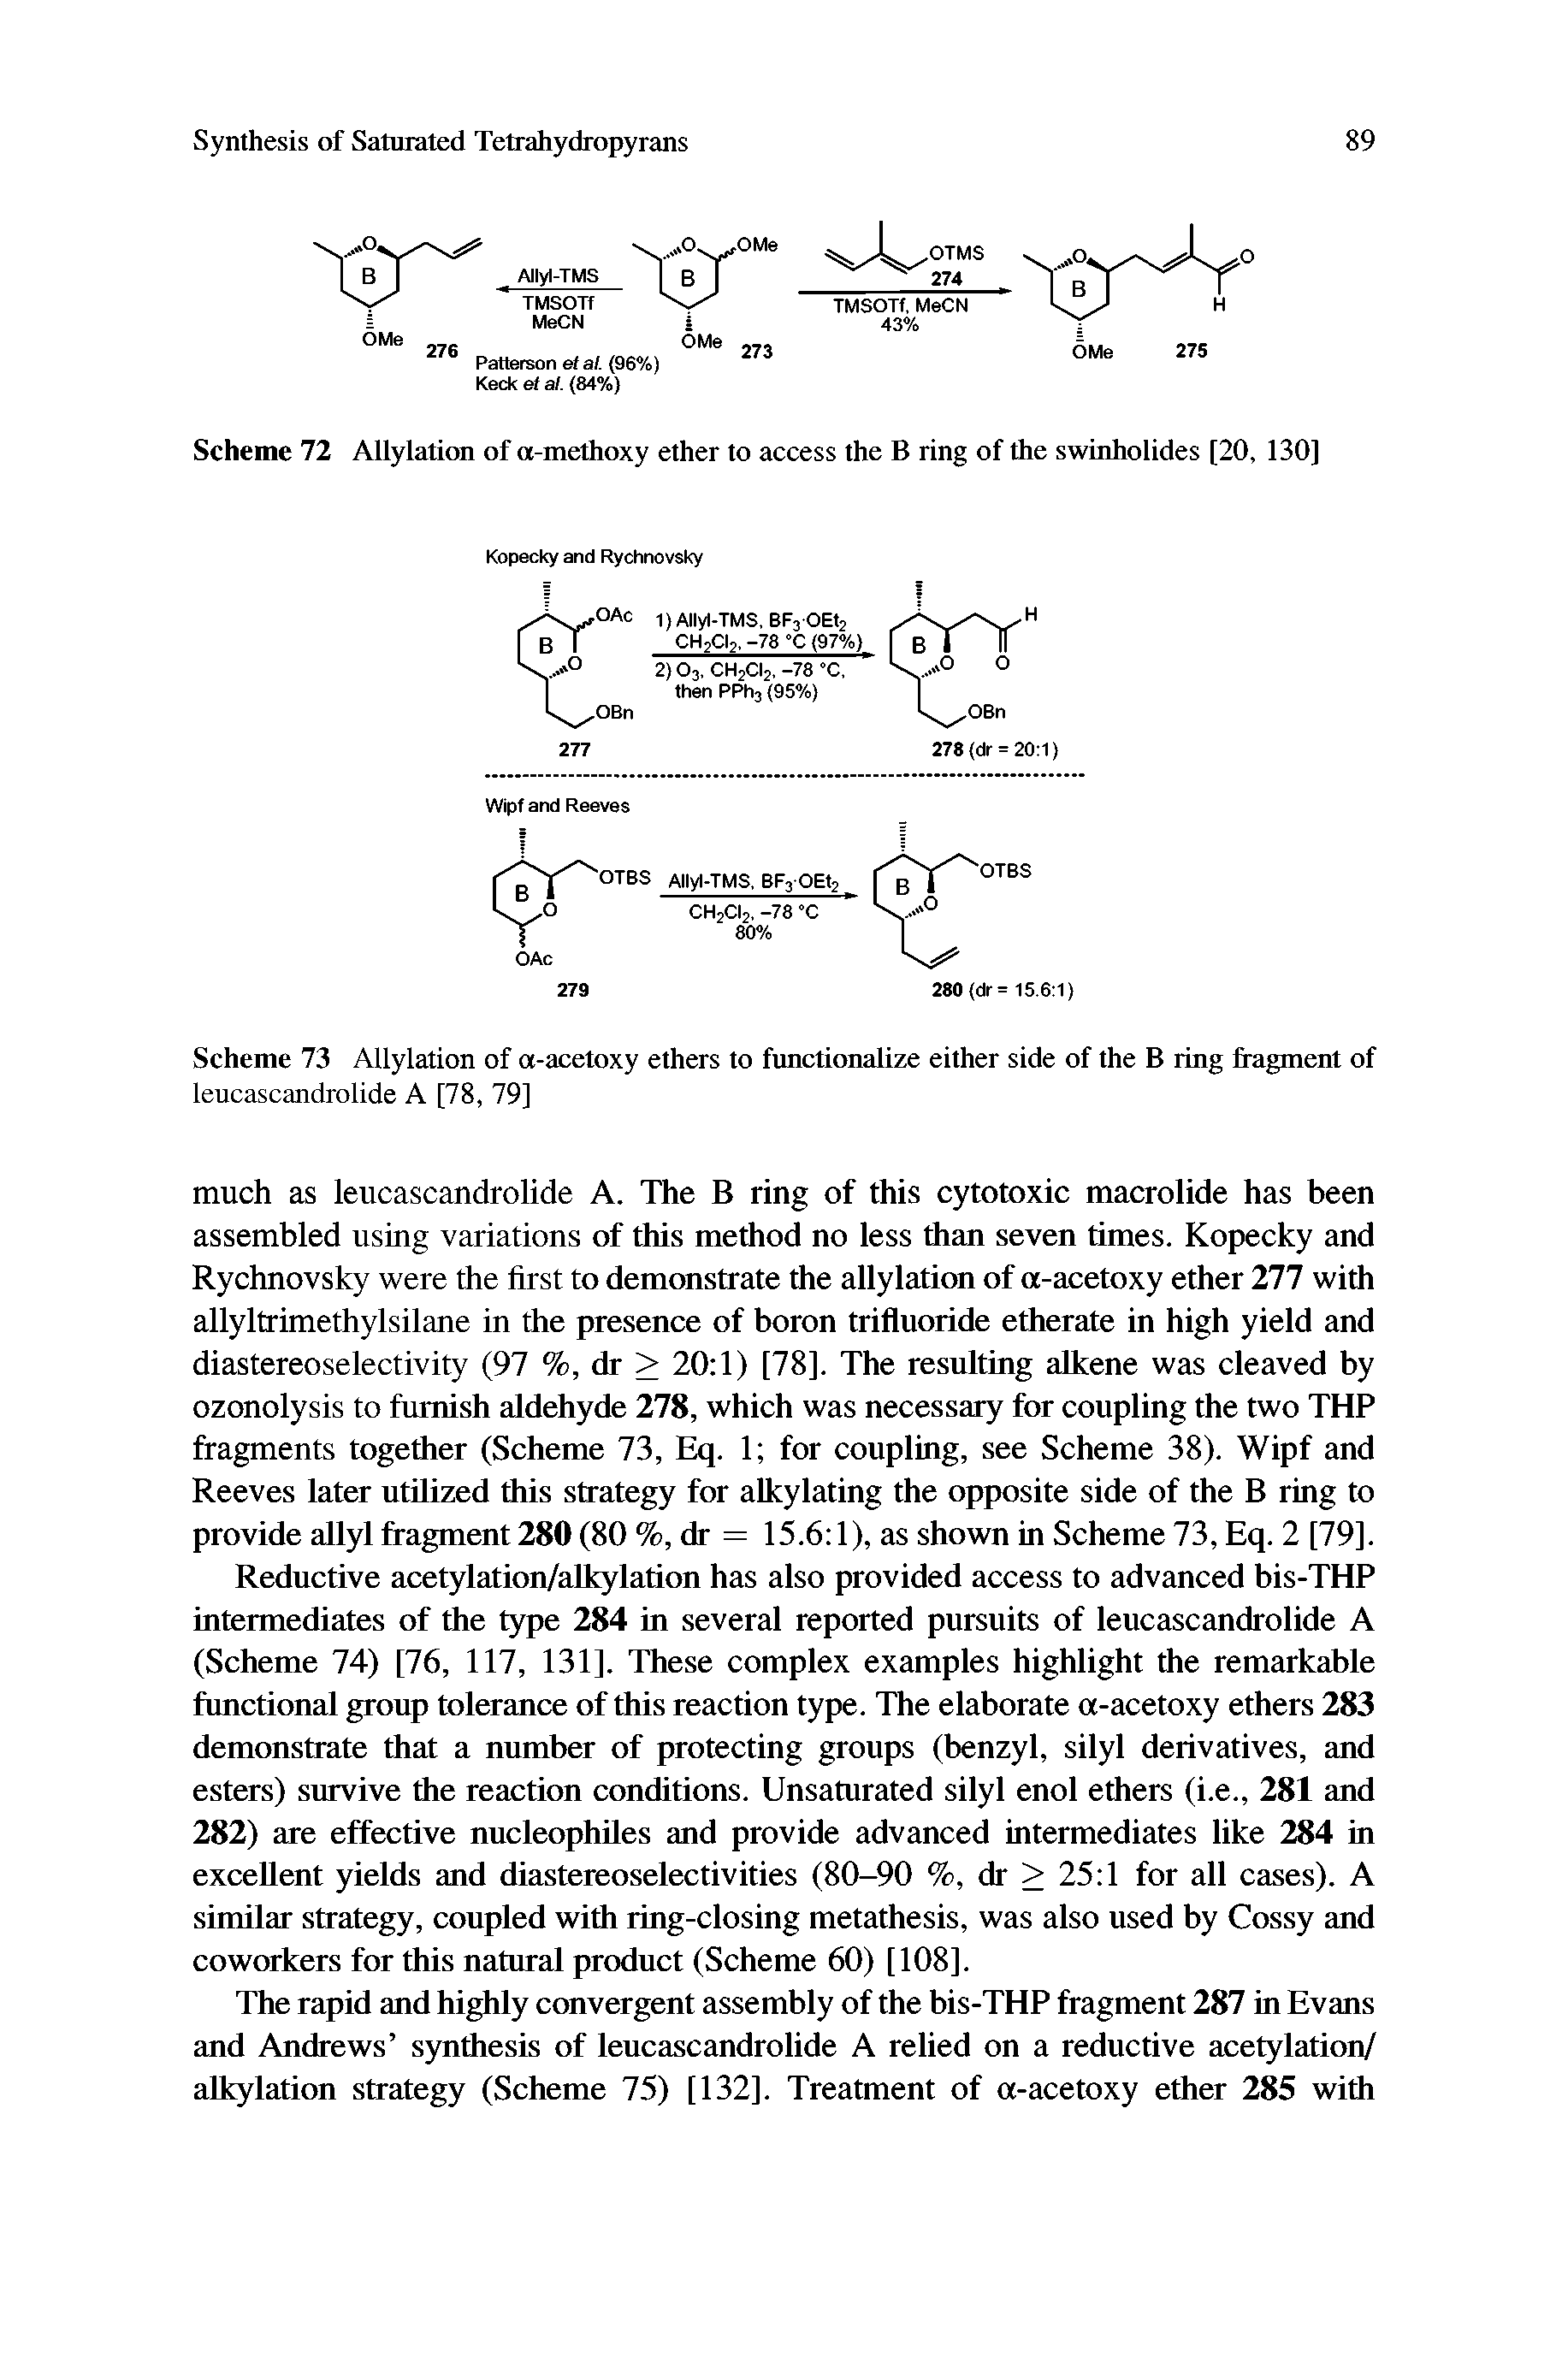 Scheme 73 AUylation of a-acetoxy ethers to functionalize either side of the B ring fragment of leucascandrolide A [78, 79]...